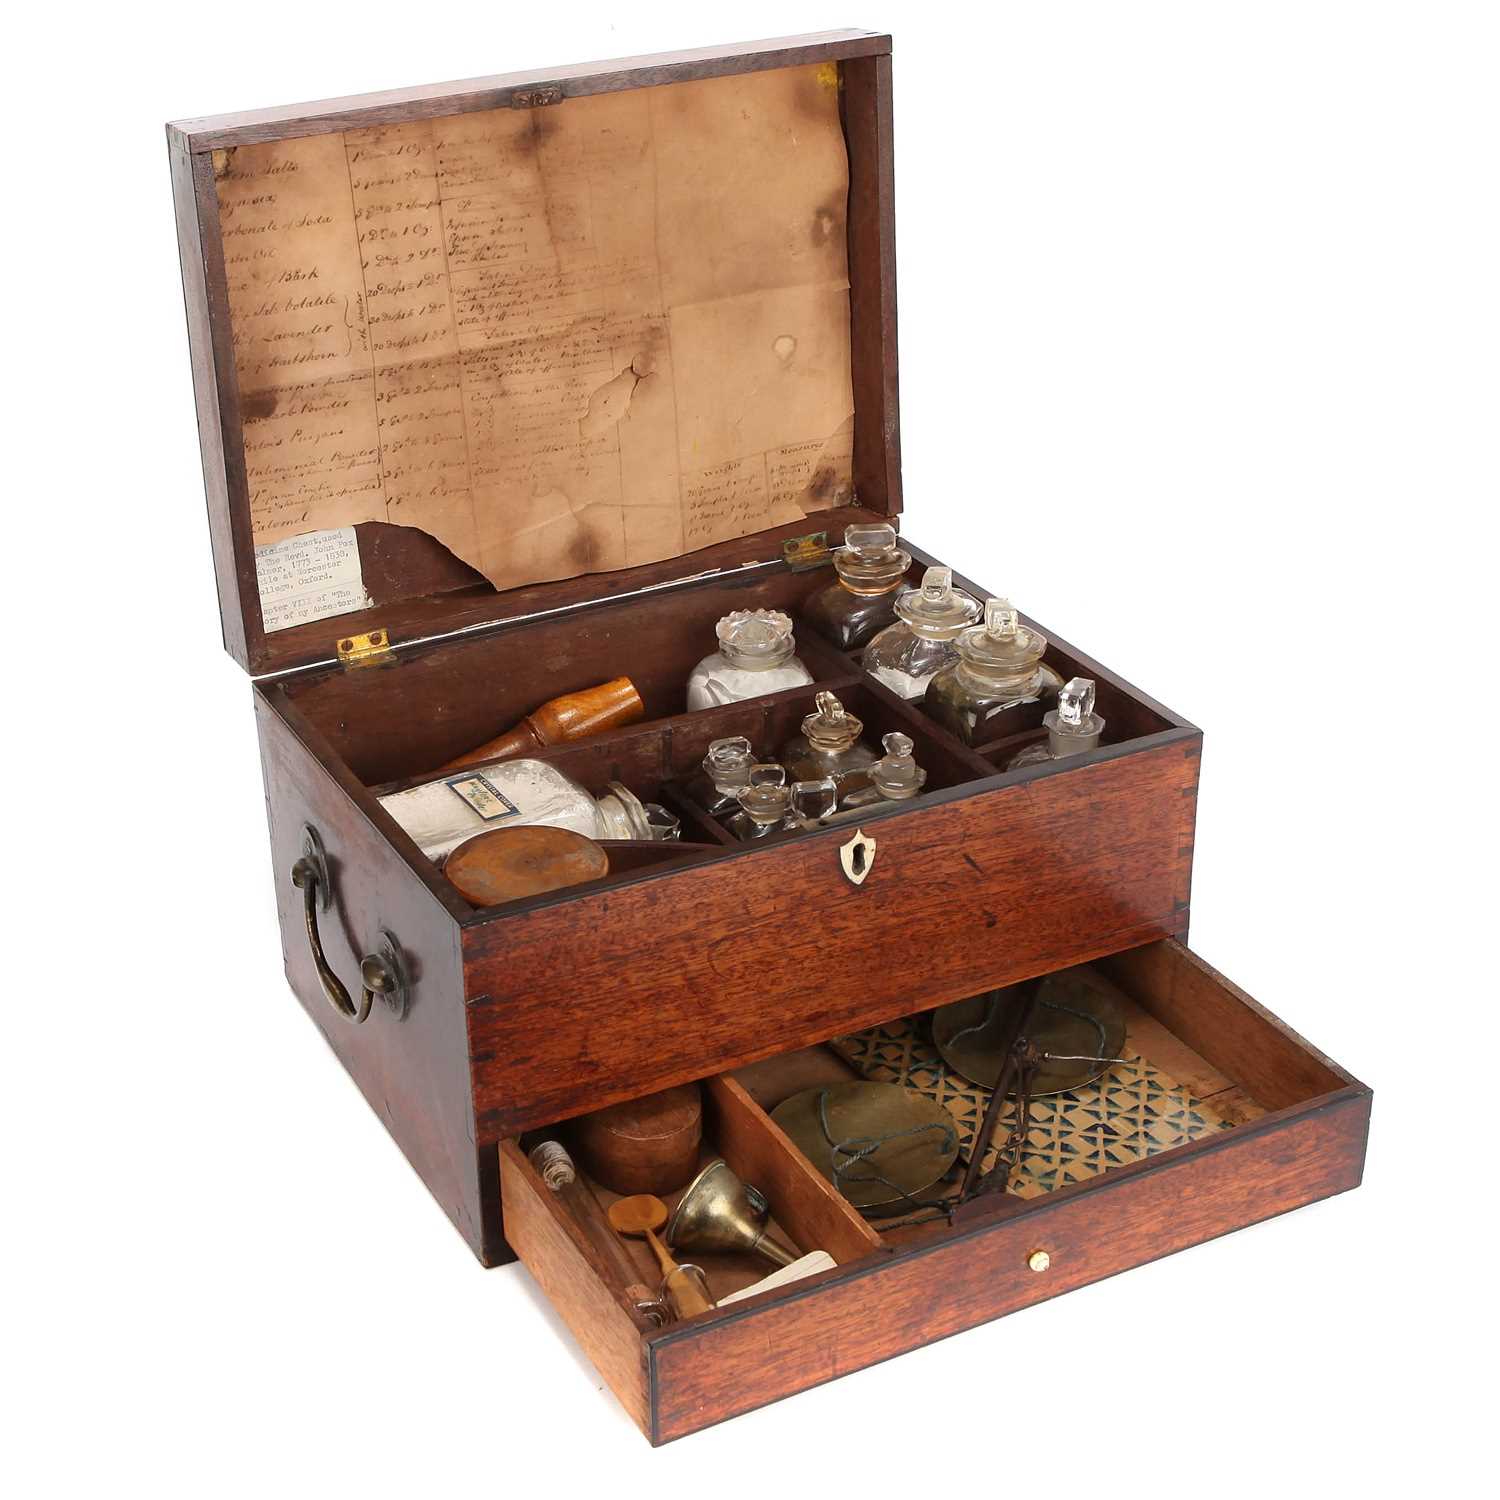 Lot 37 - An Early 19th Century Rosewood Domestic Medicine Chest